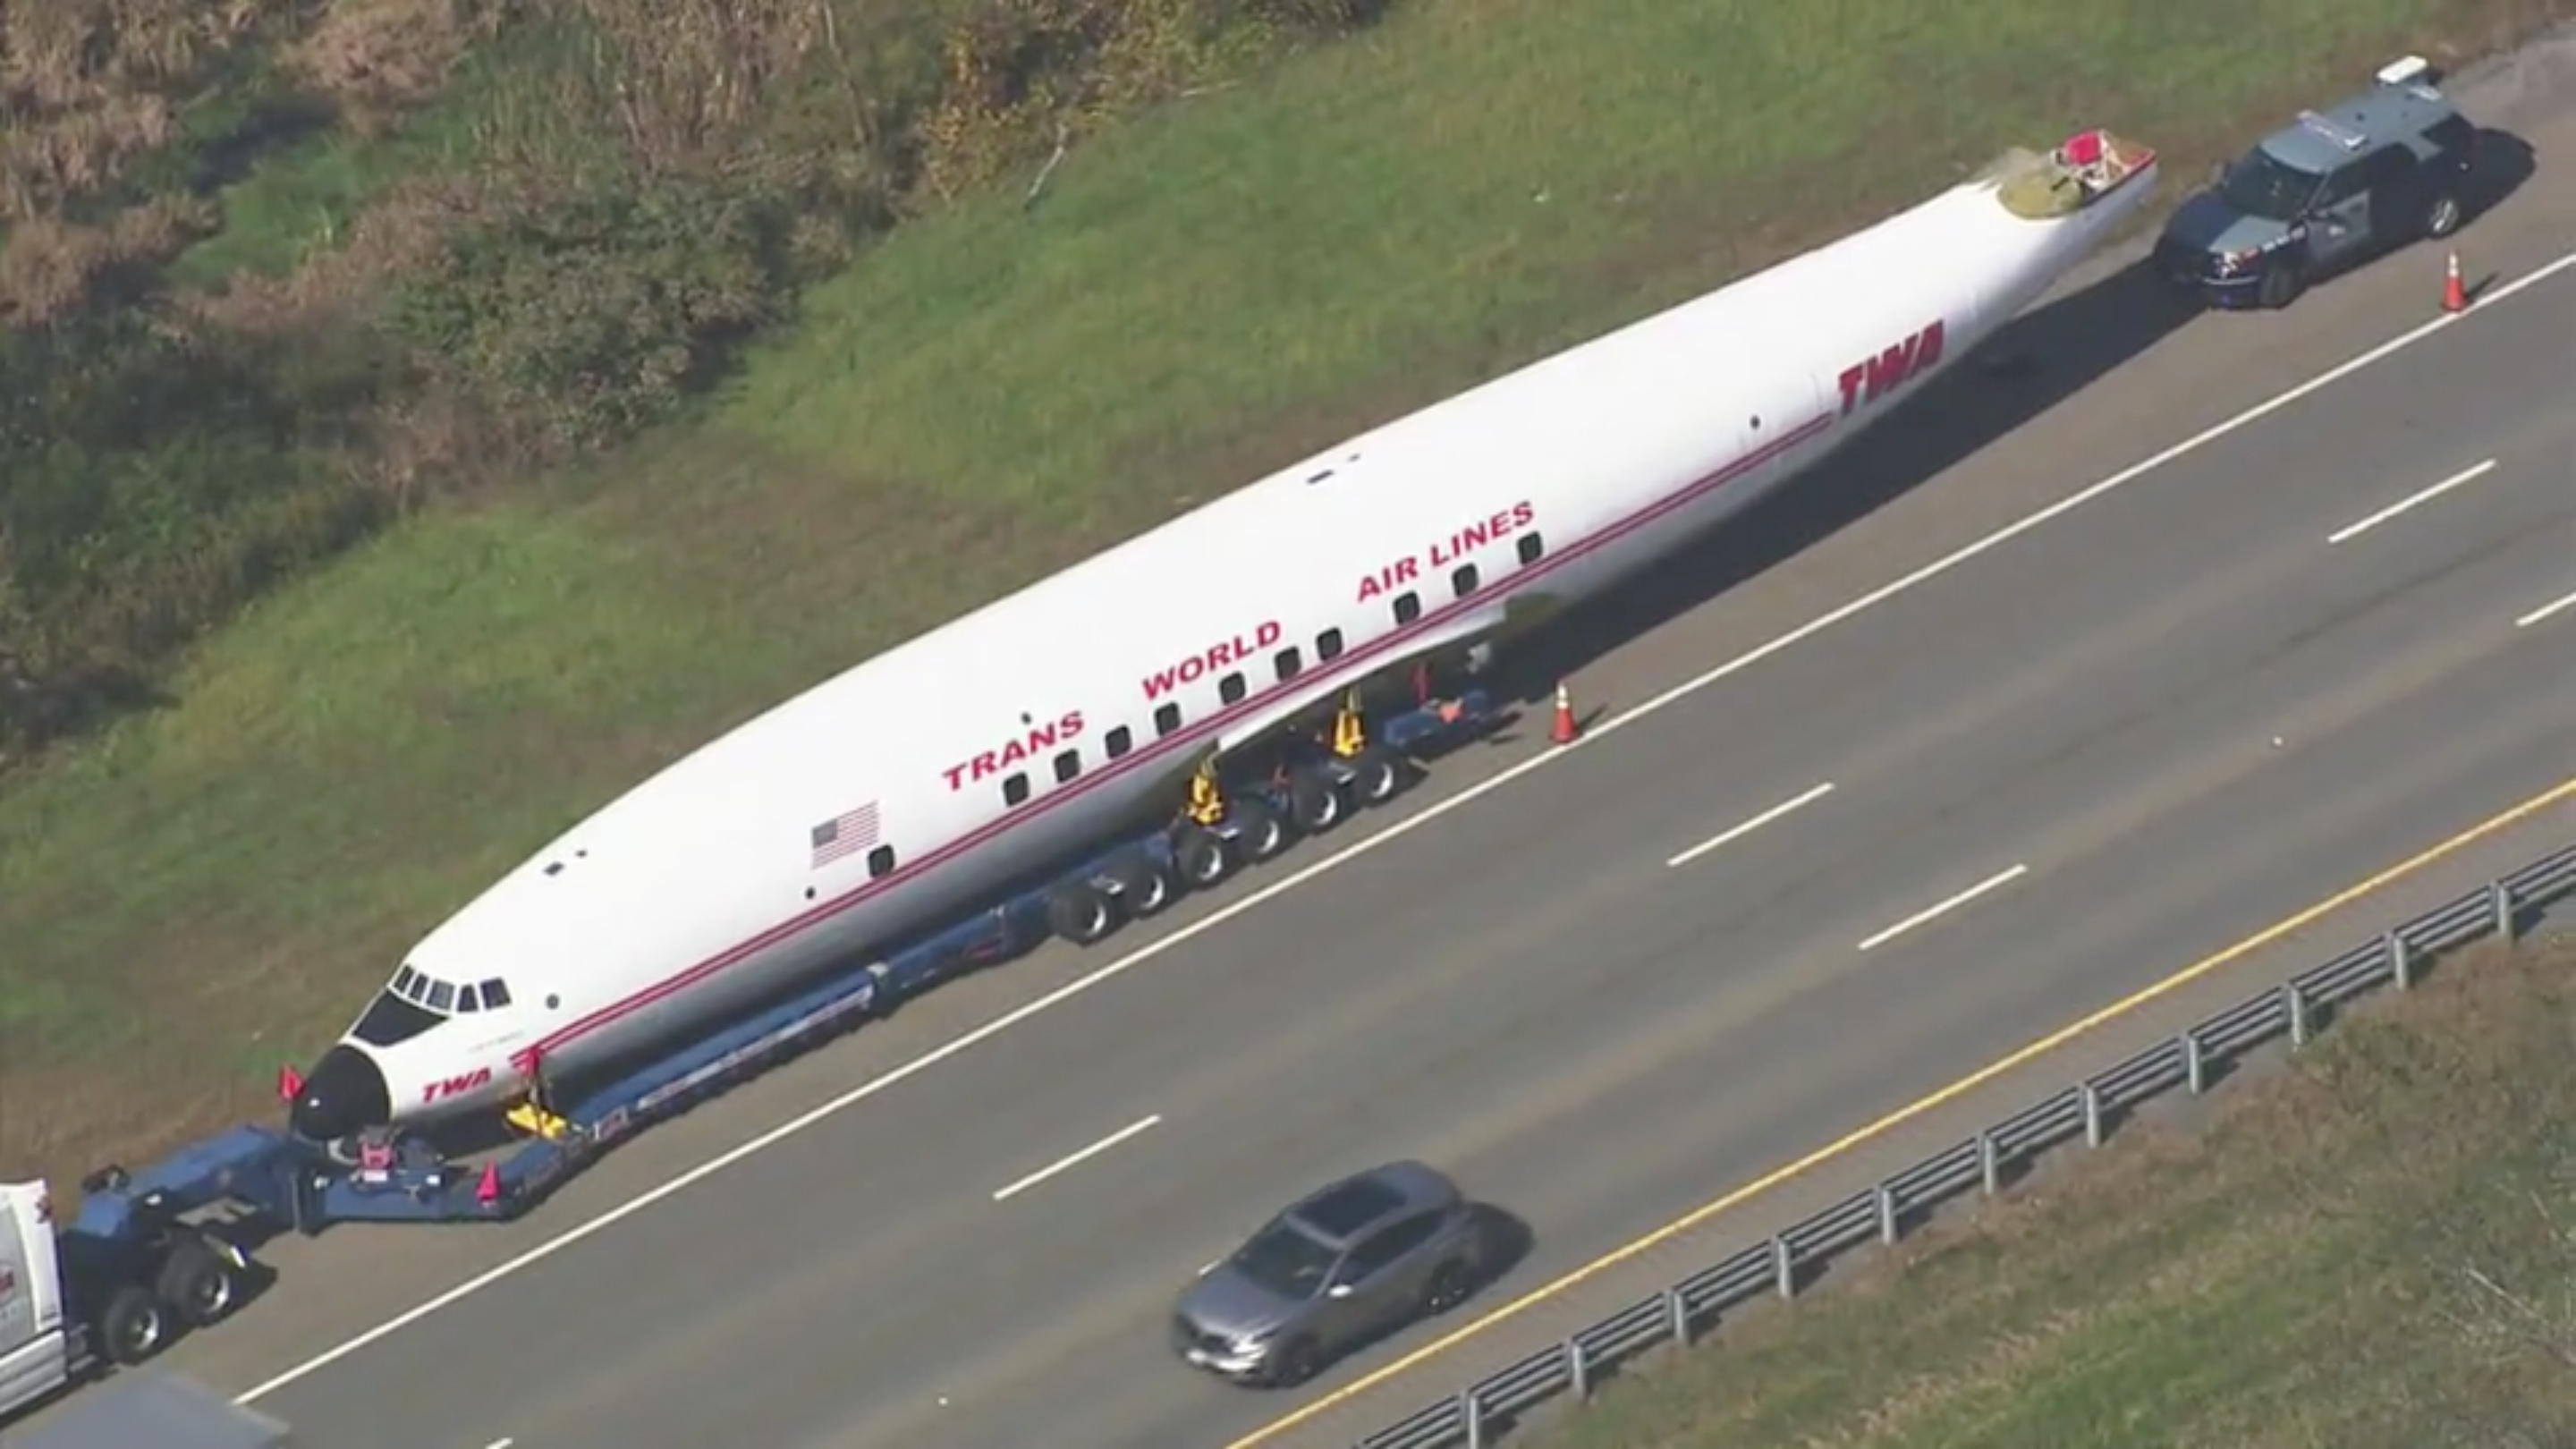 A Vintage Airplane Is Taking A Highway To Jfk